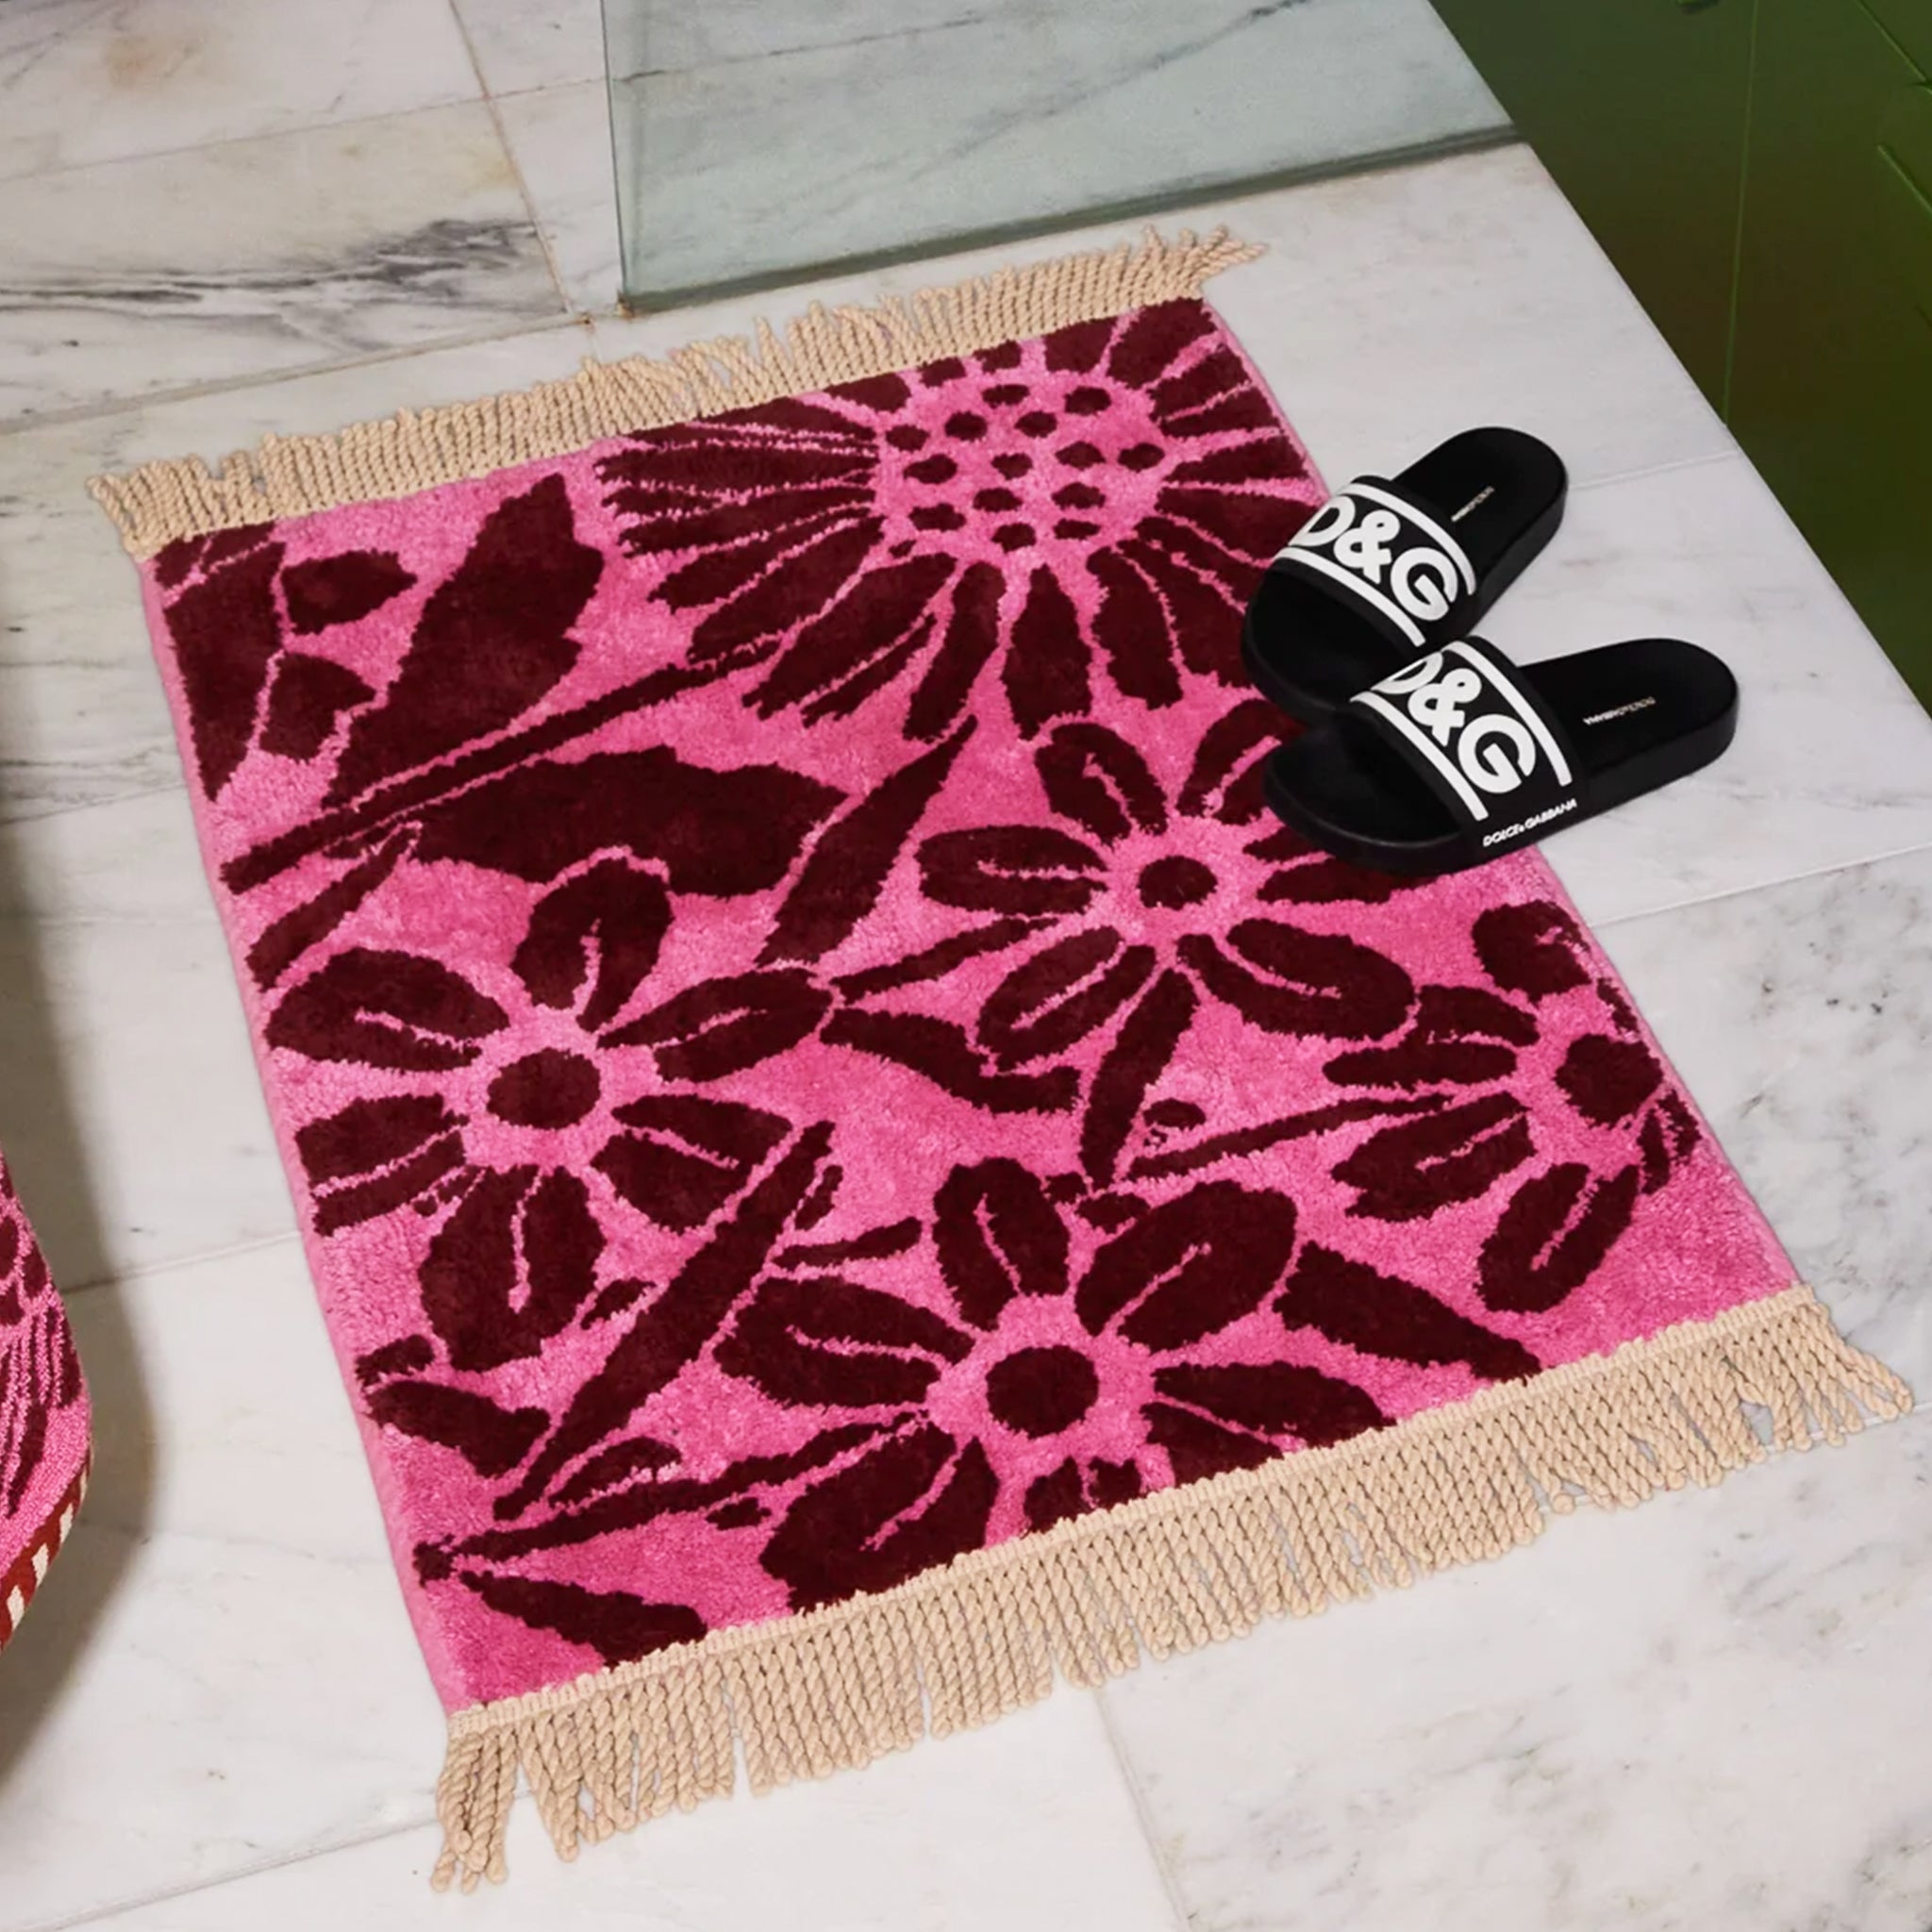 A pink and dark burgundy floral print bath mat with twist fringe details on two ends. 